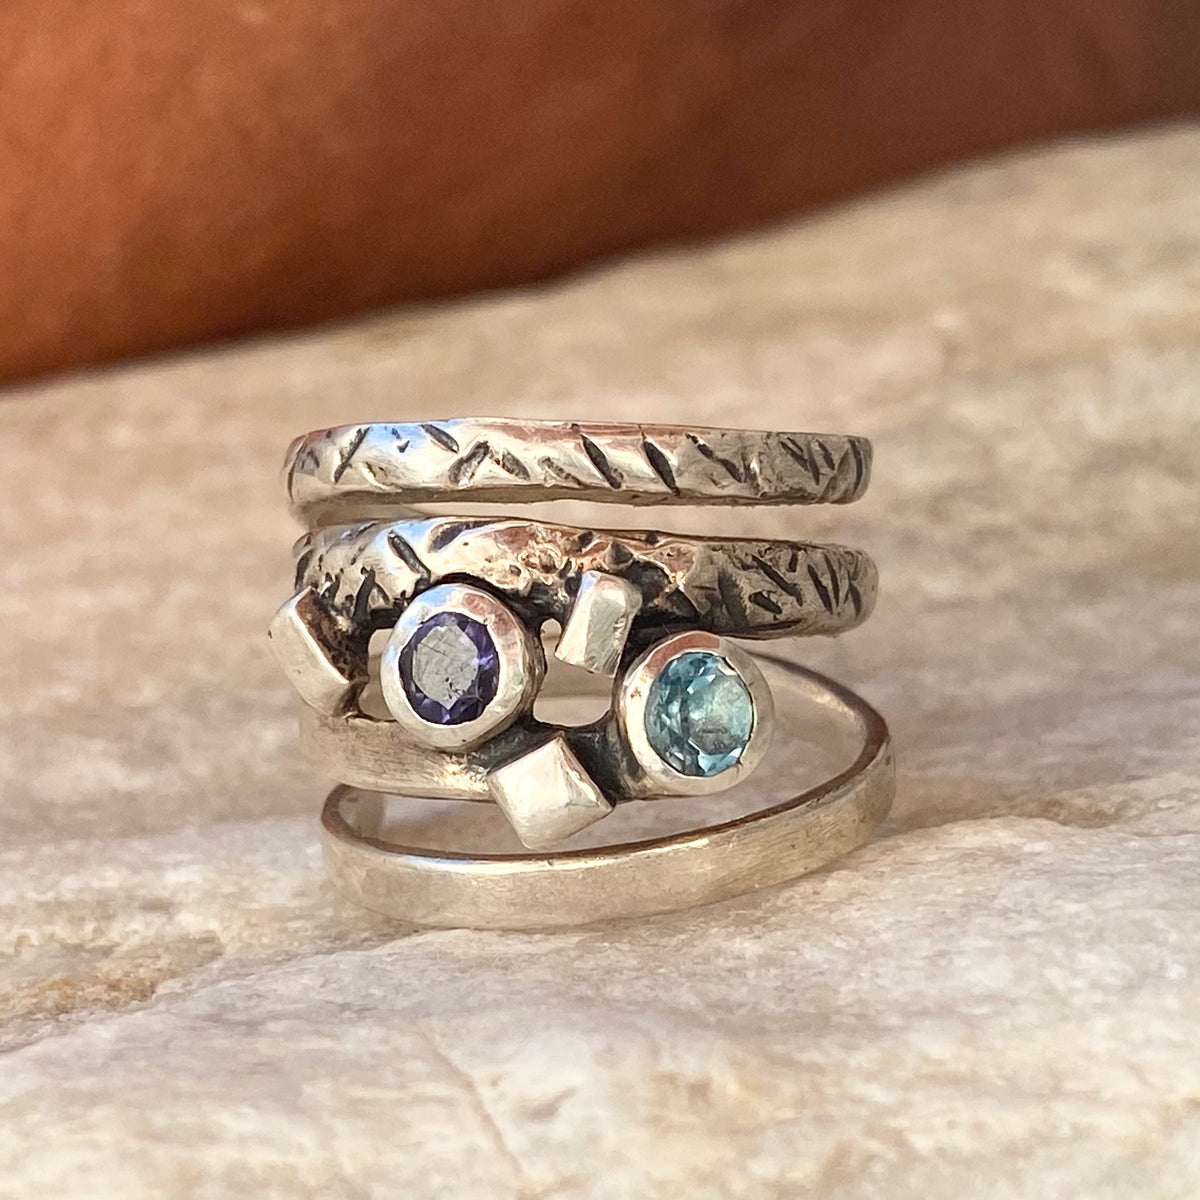 Silver spiral ring with blue gemstones, silver spring ring